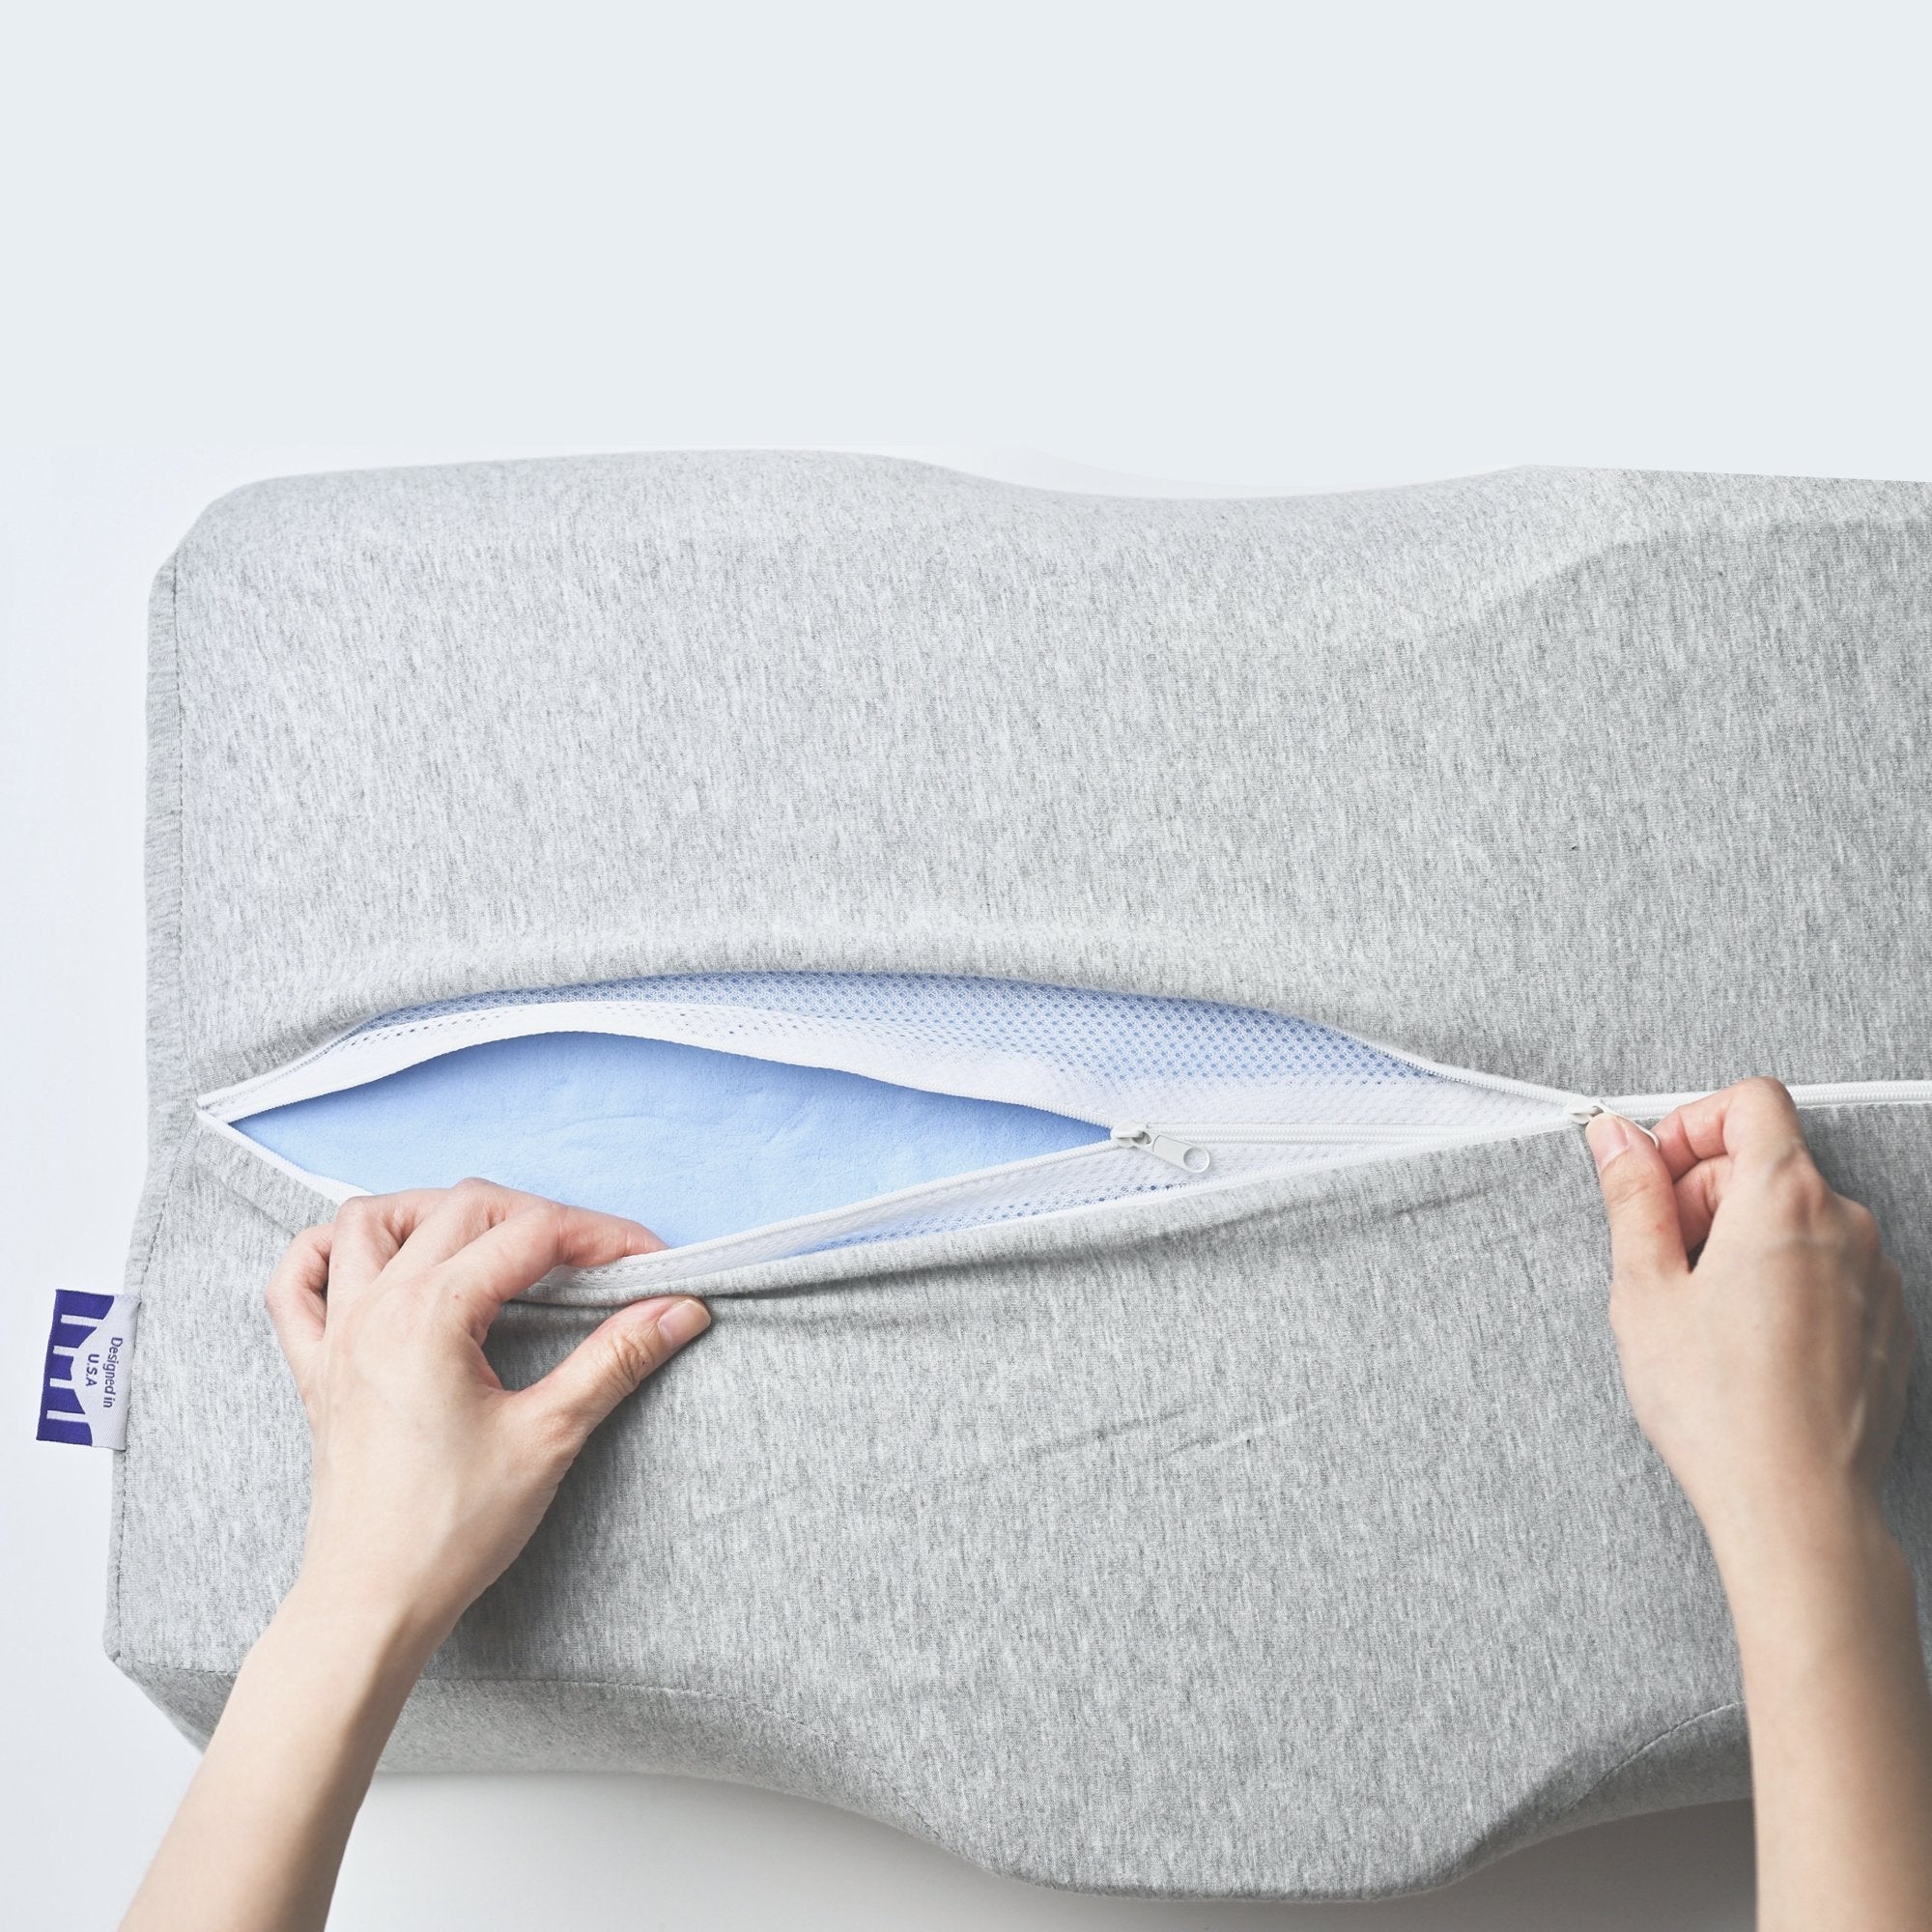 Cushion Lab Deep Sleep Pillow, Patented Ergonomic Contour Design for Side &  Back Sleepers, Orthopedic Cervical Shape Gently Cradles Head & Provides